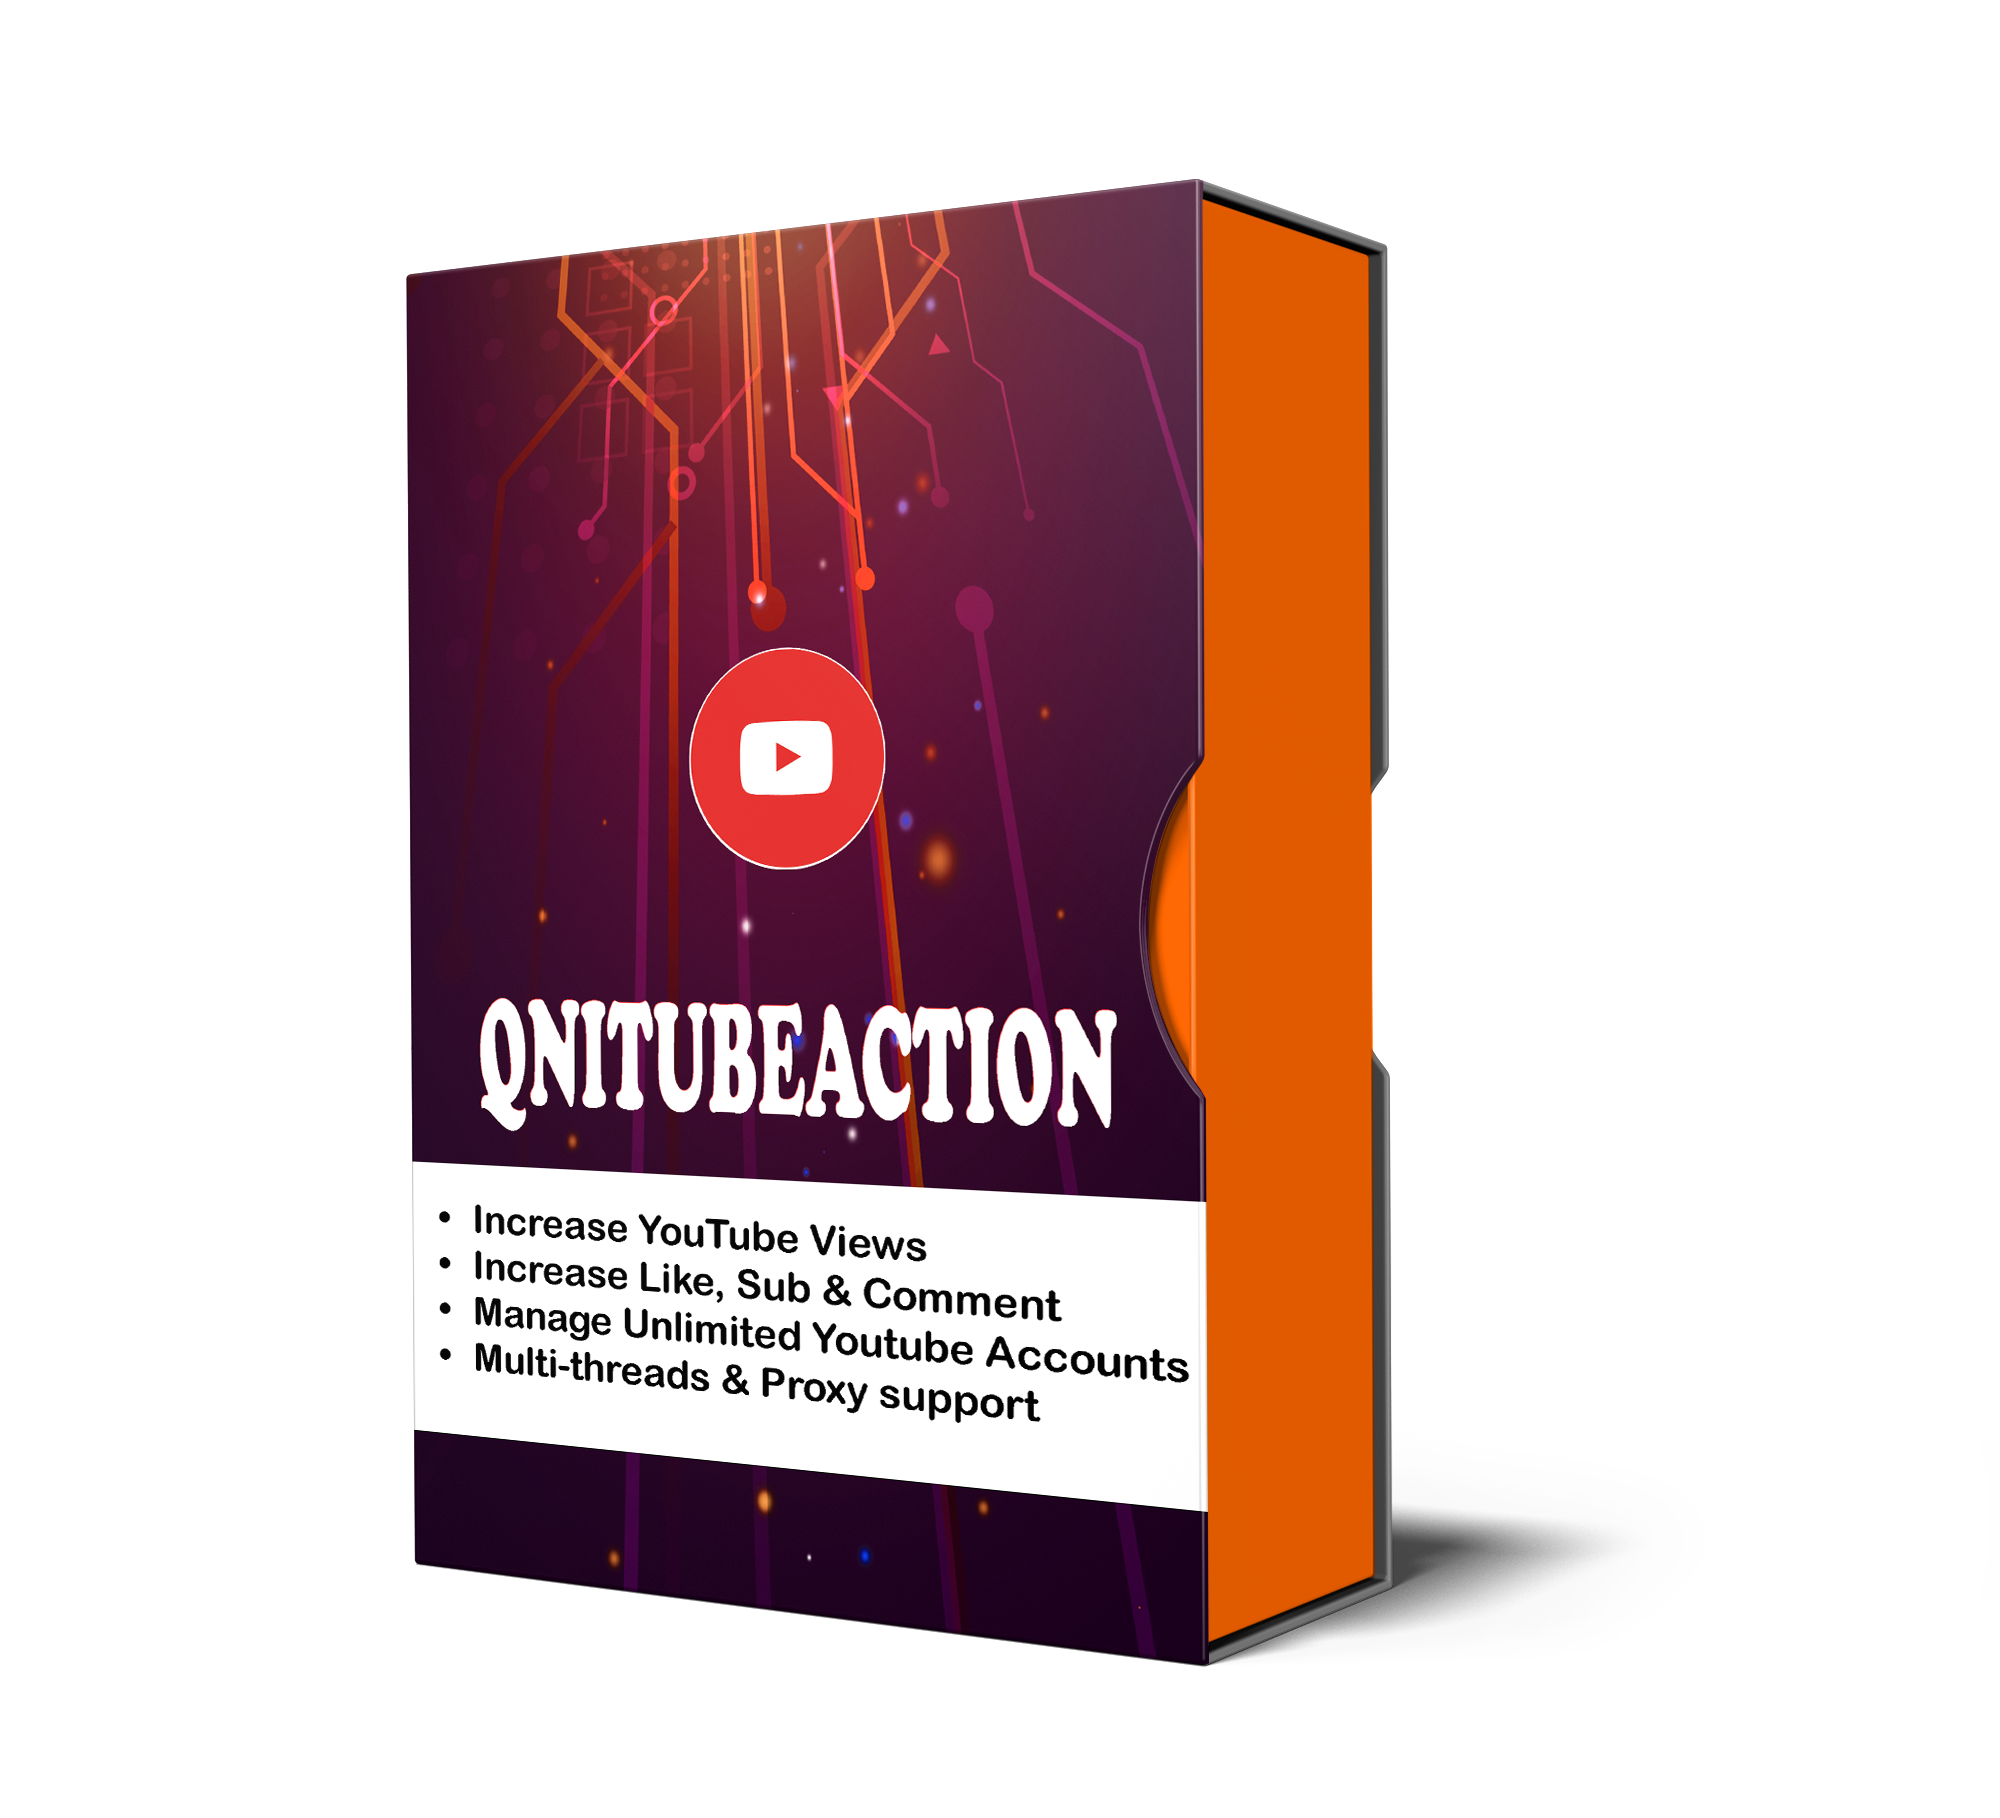 YOUTUBE VIEW INCREASER – INCREASE YOUTUBE VIEWS AUTOMATICALLY USING QNITUBEACTION